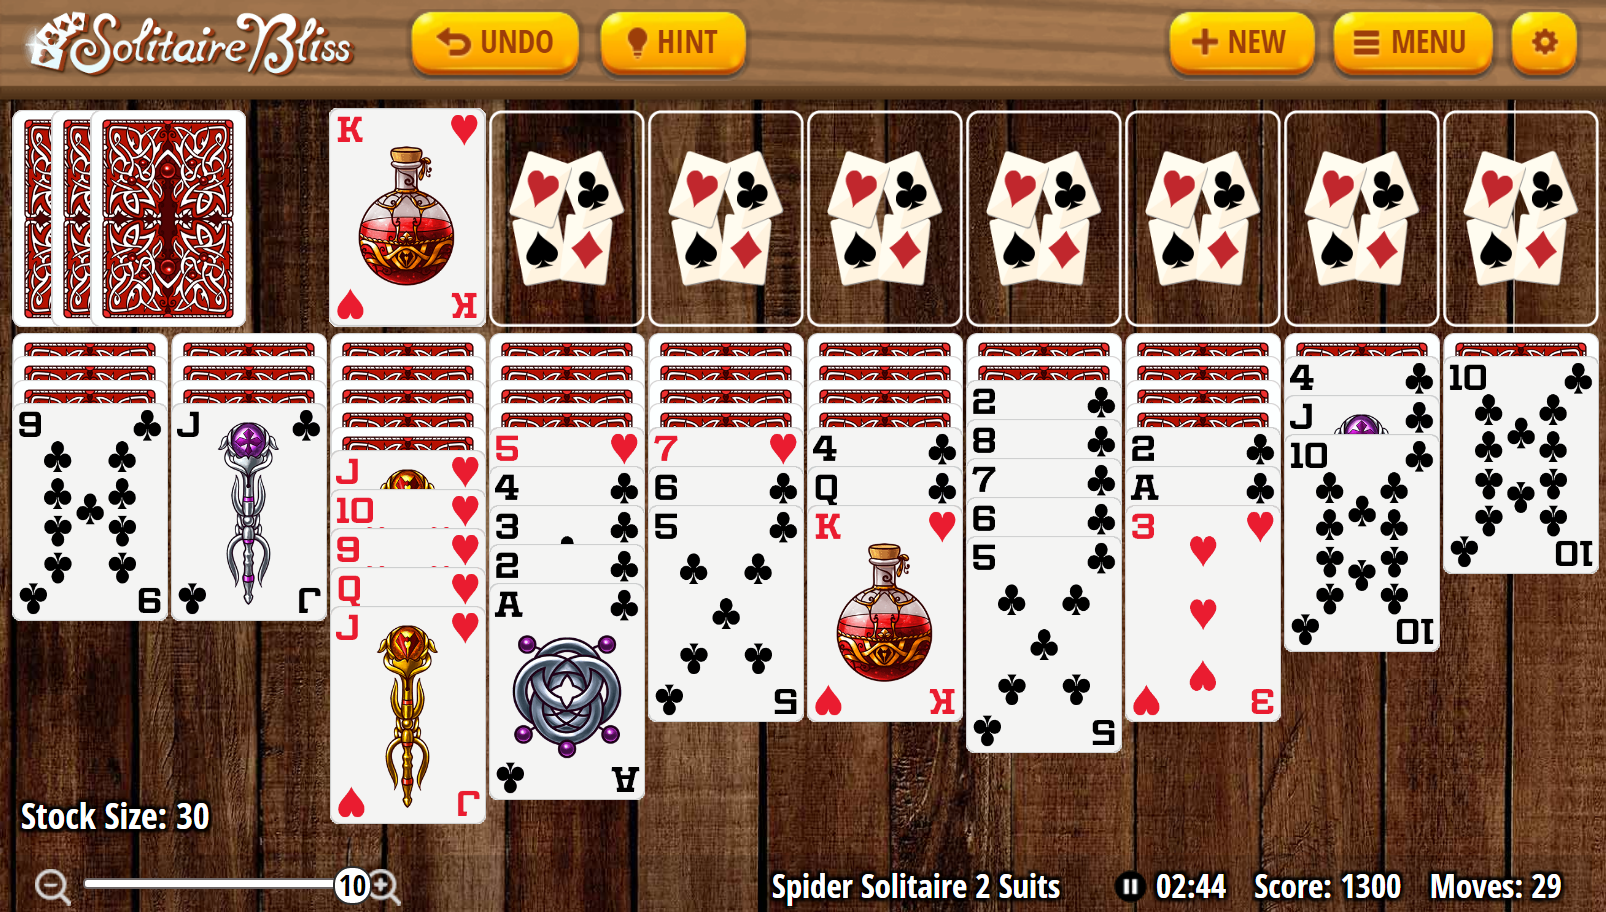 spider solitaire strategies 2 suits